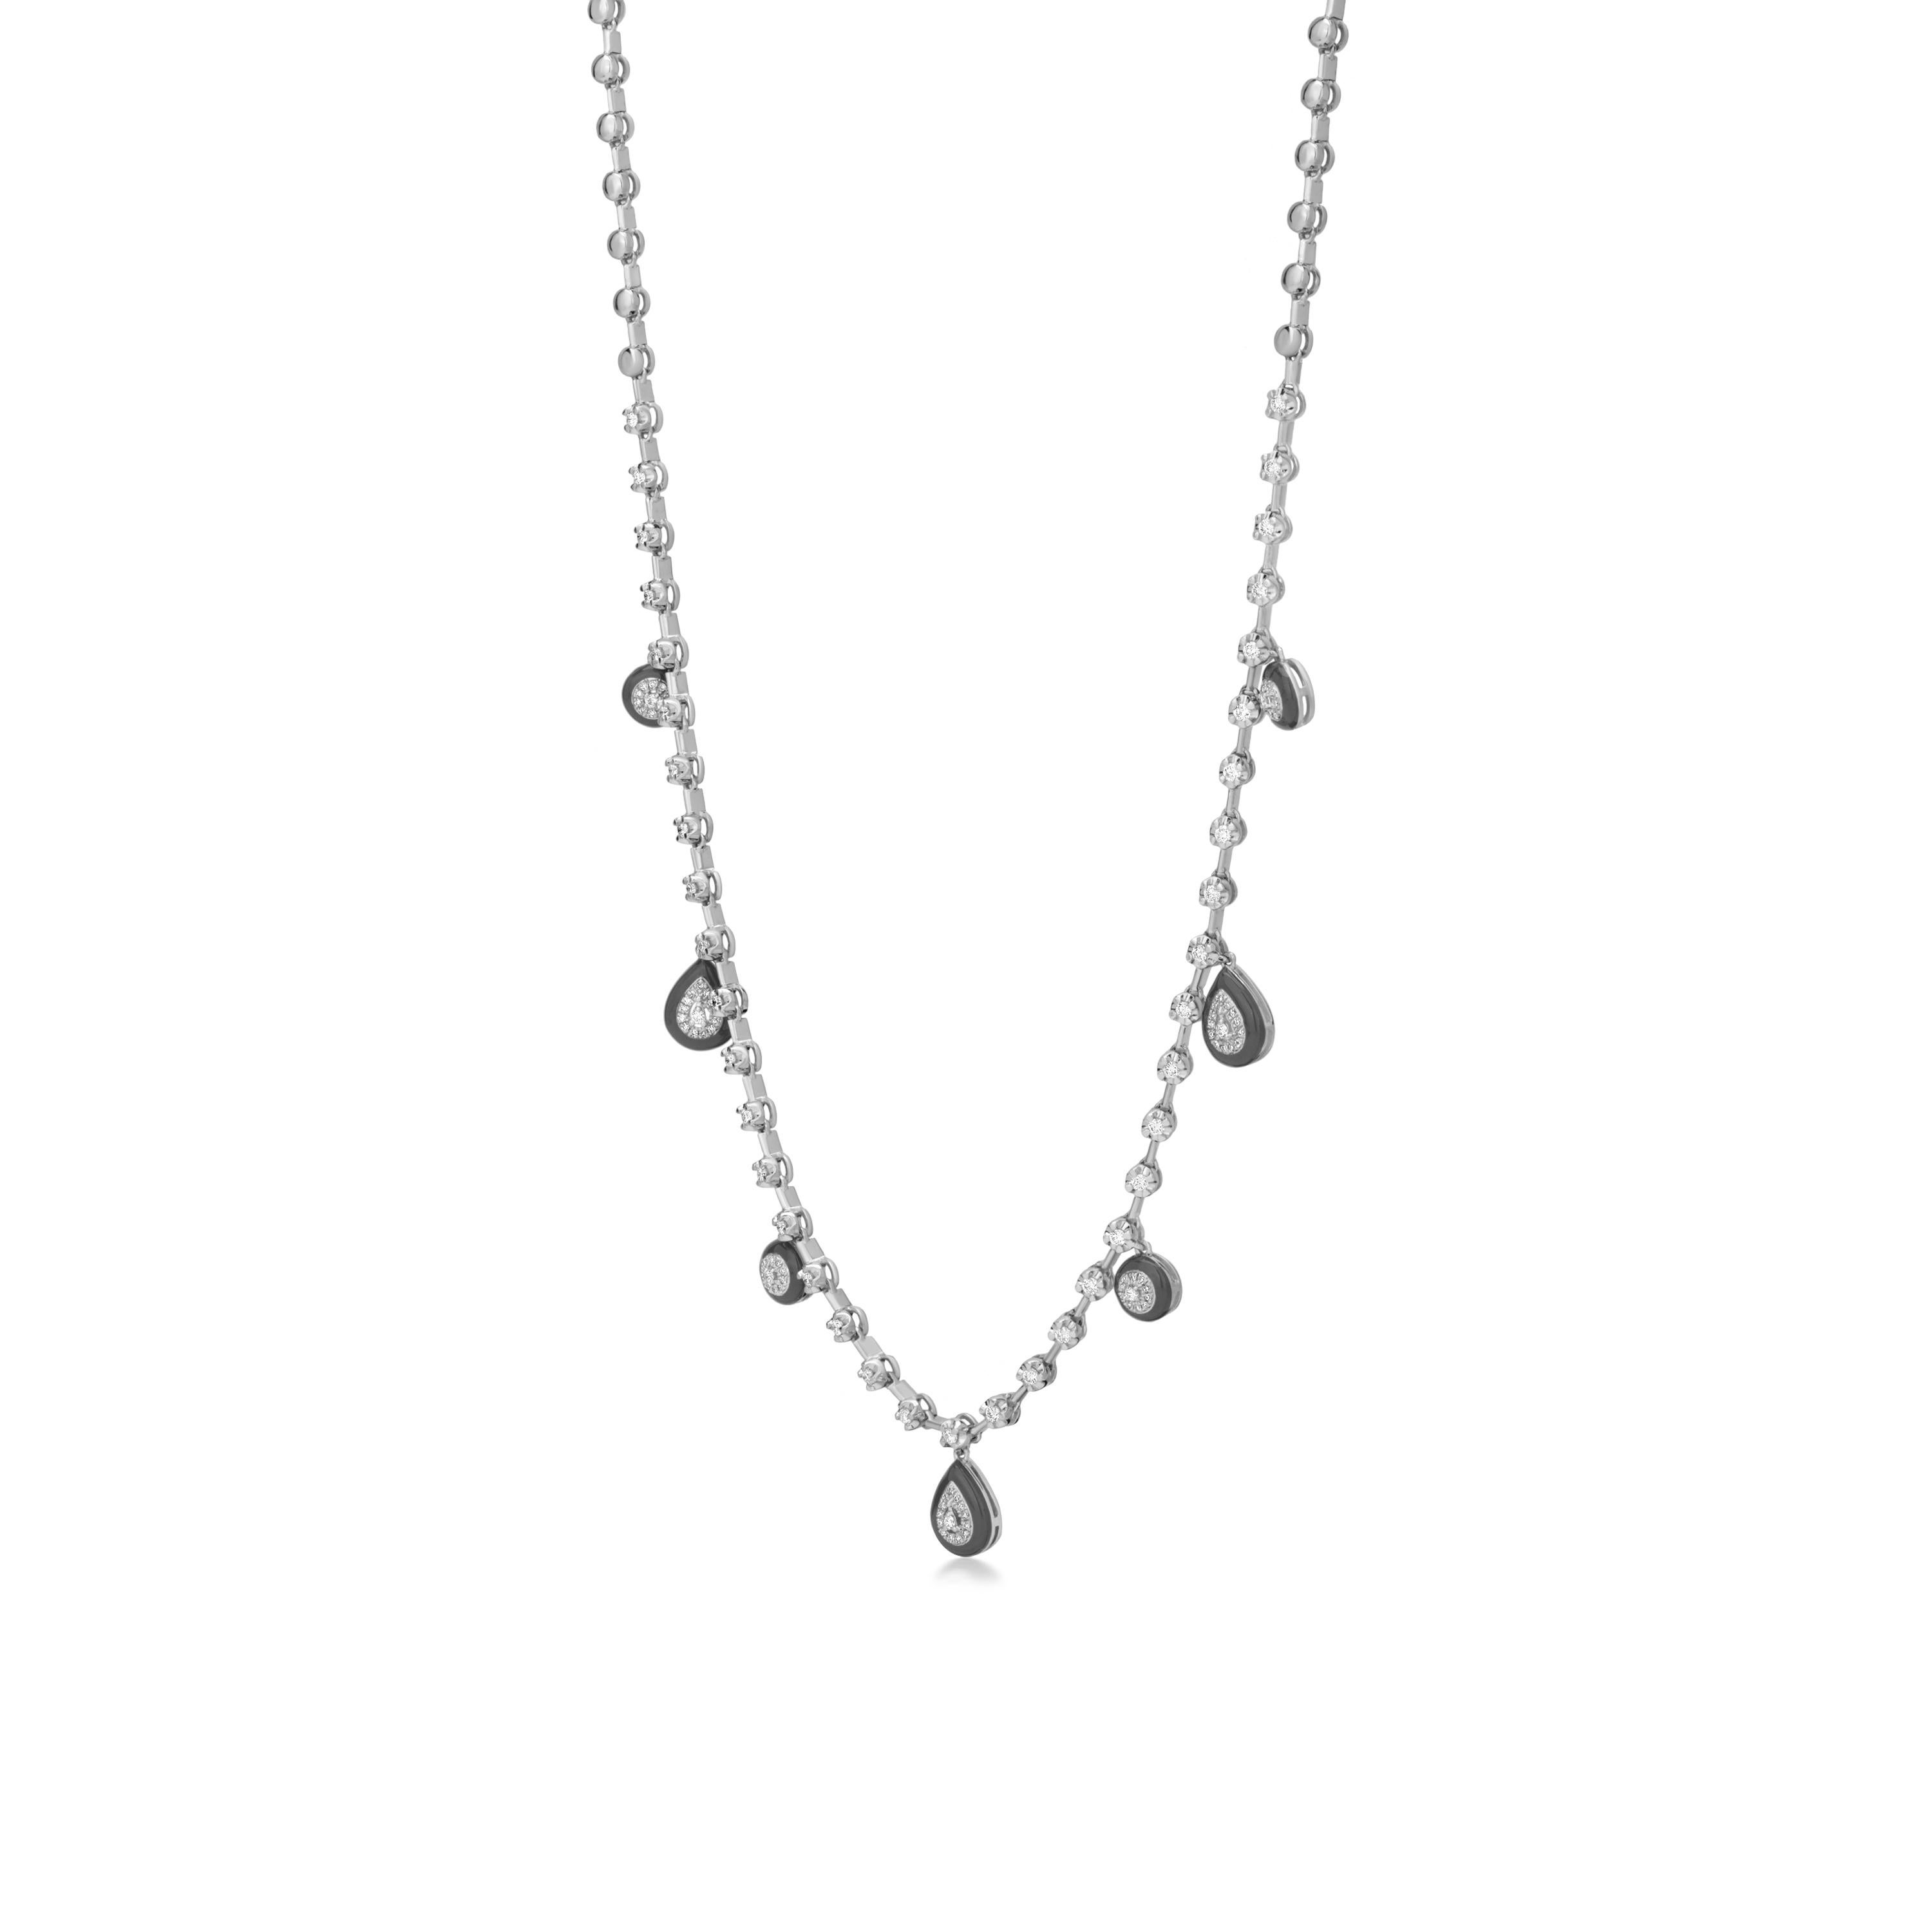 Contemporary Luxle 0.77 Carat T.W. Diamond Charm Necklace in 18k White Gold For Sale